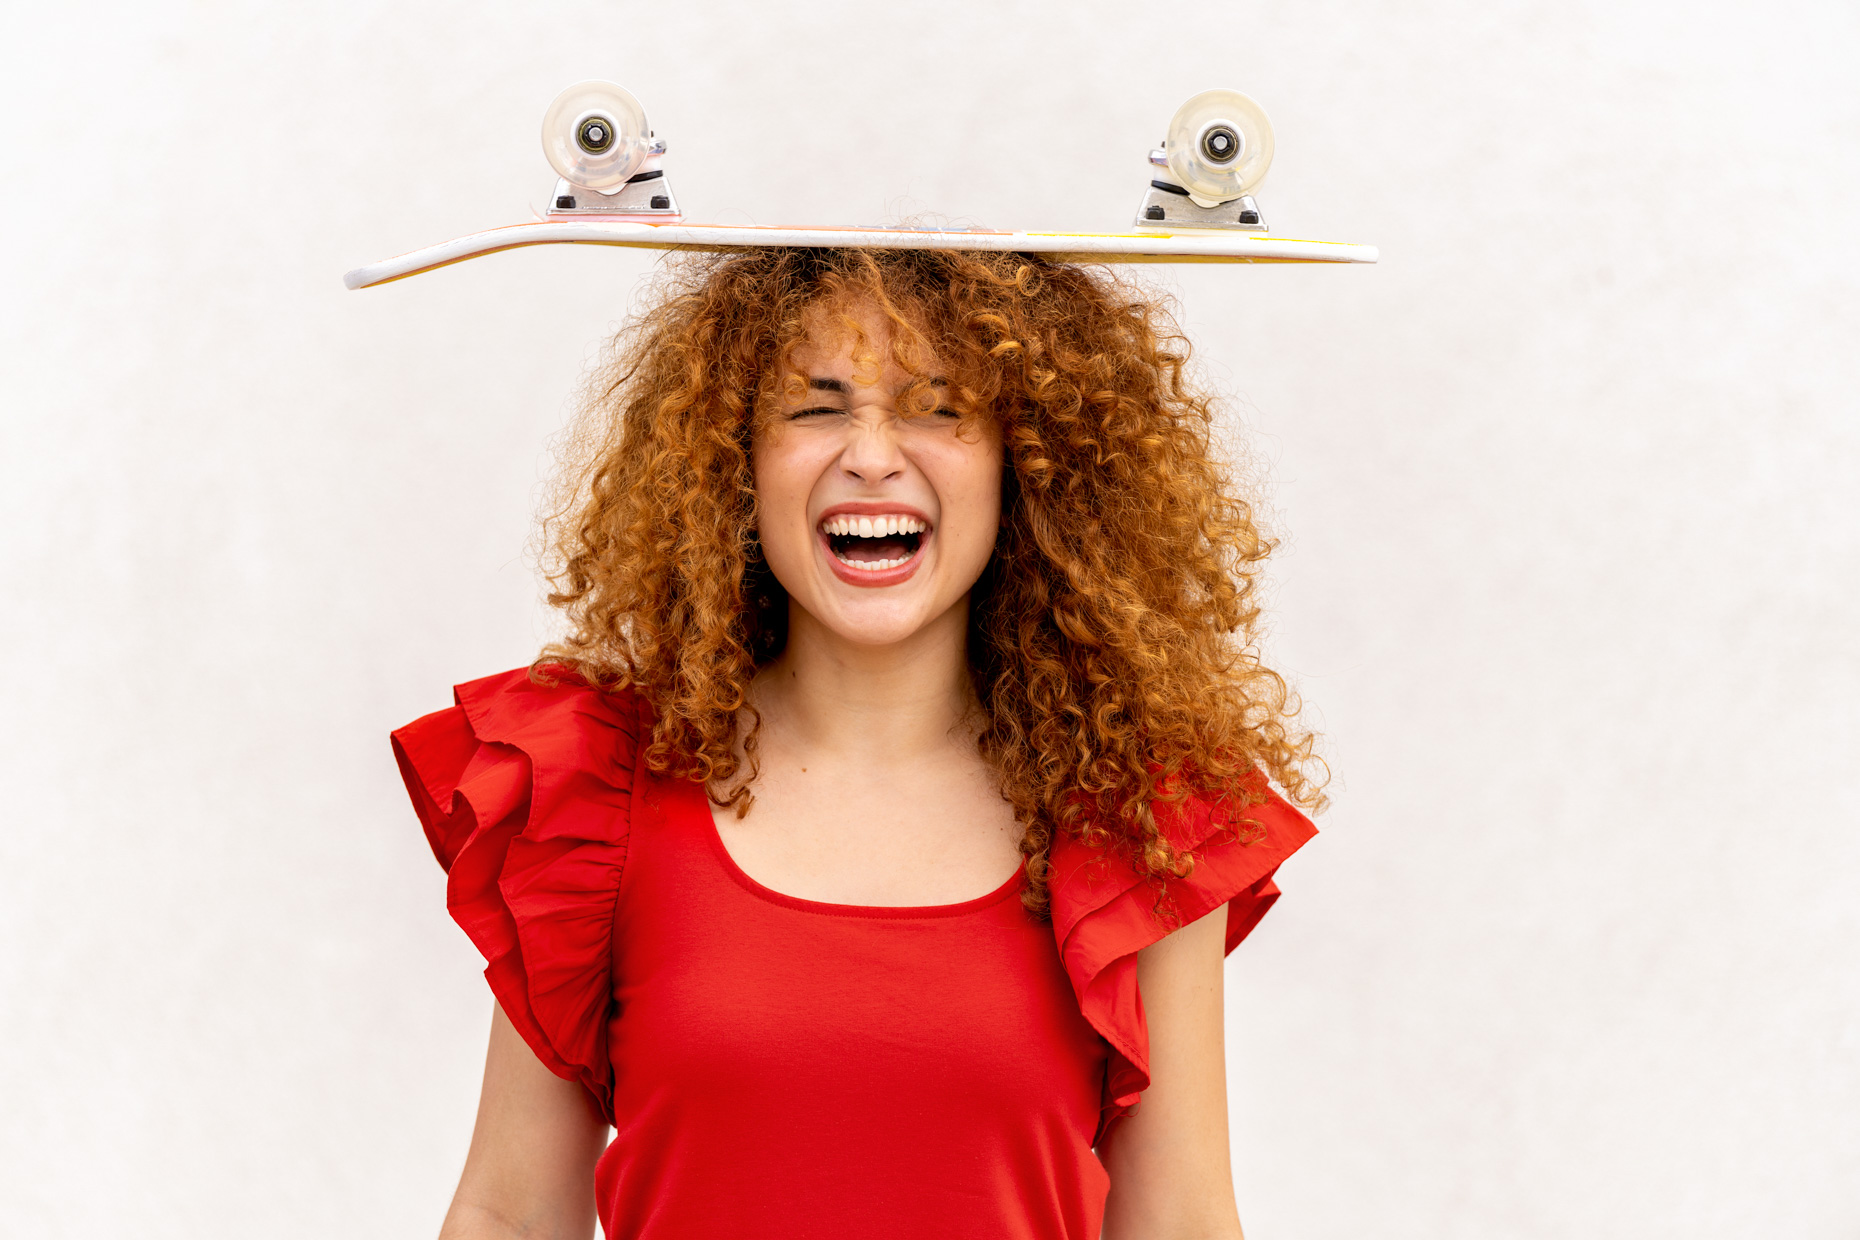 Woman-smiling-with-skateboard-on-her-head-red-shirt-042623_WILDLIGHT_SCENE5_8007-Edit